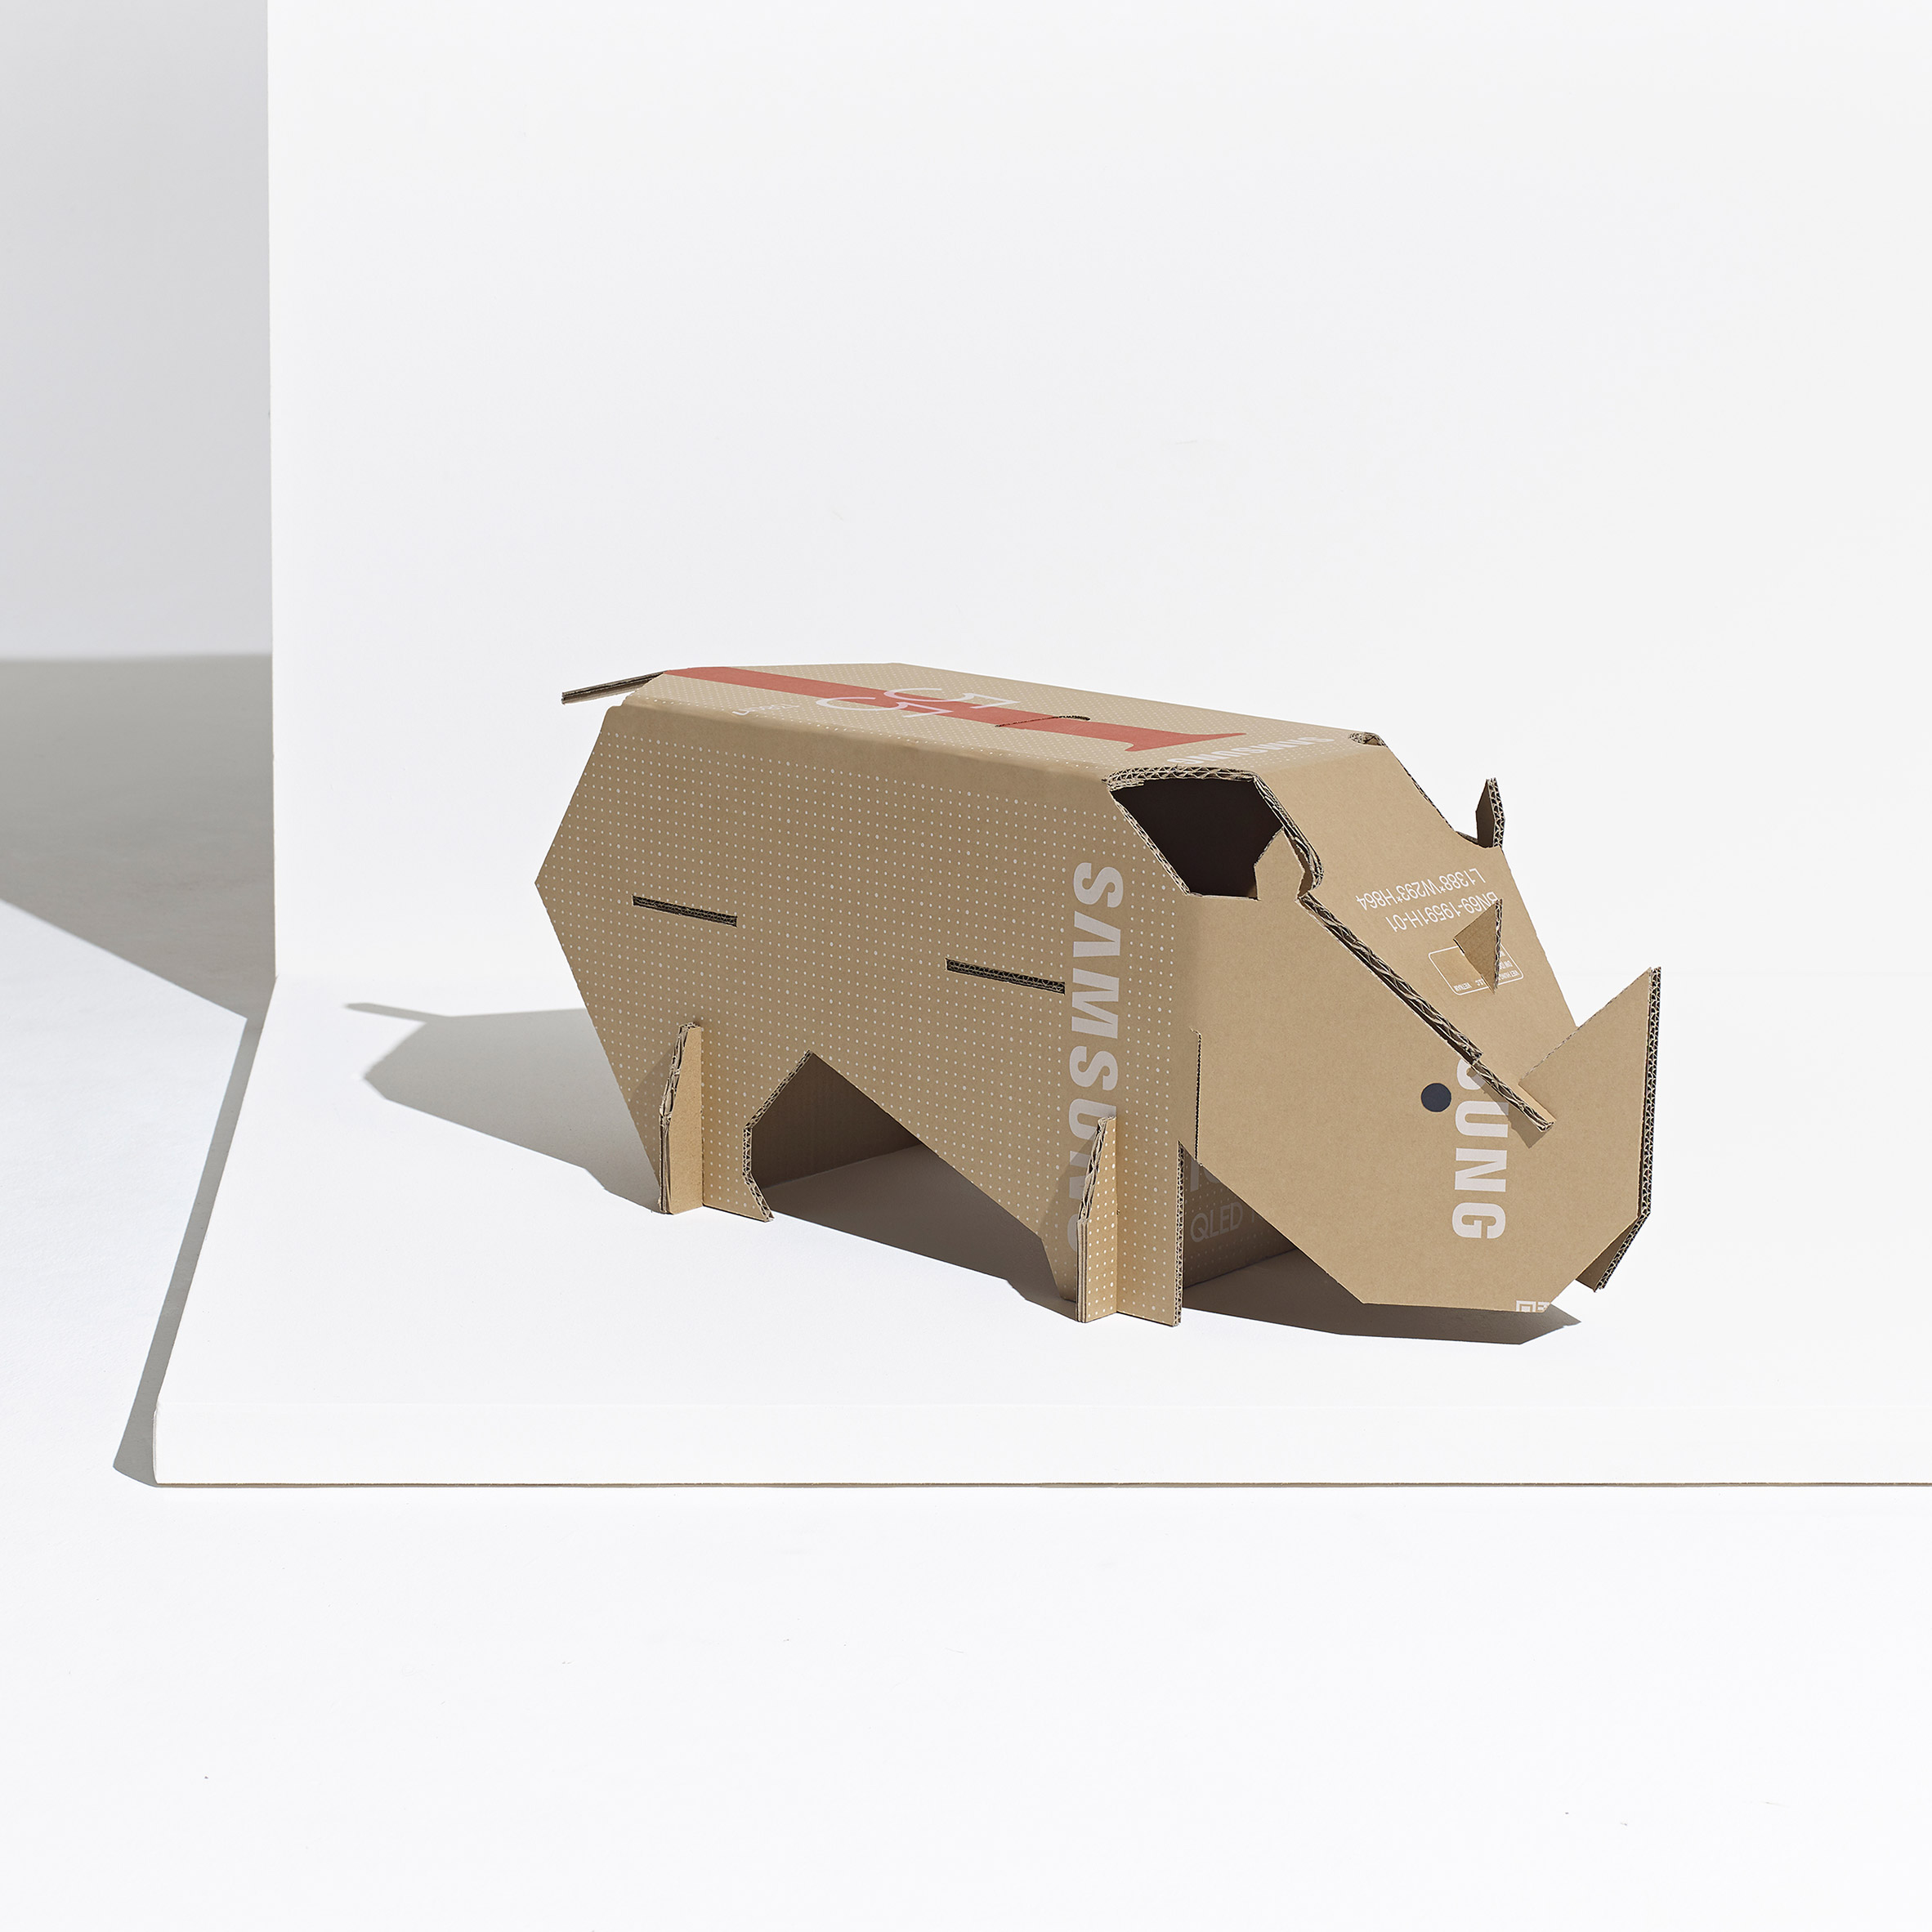 Black rhino toy made from repurposed Samsung TV cardboard boxes